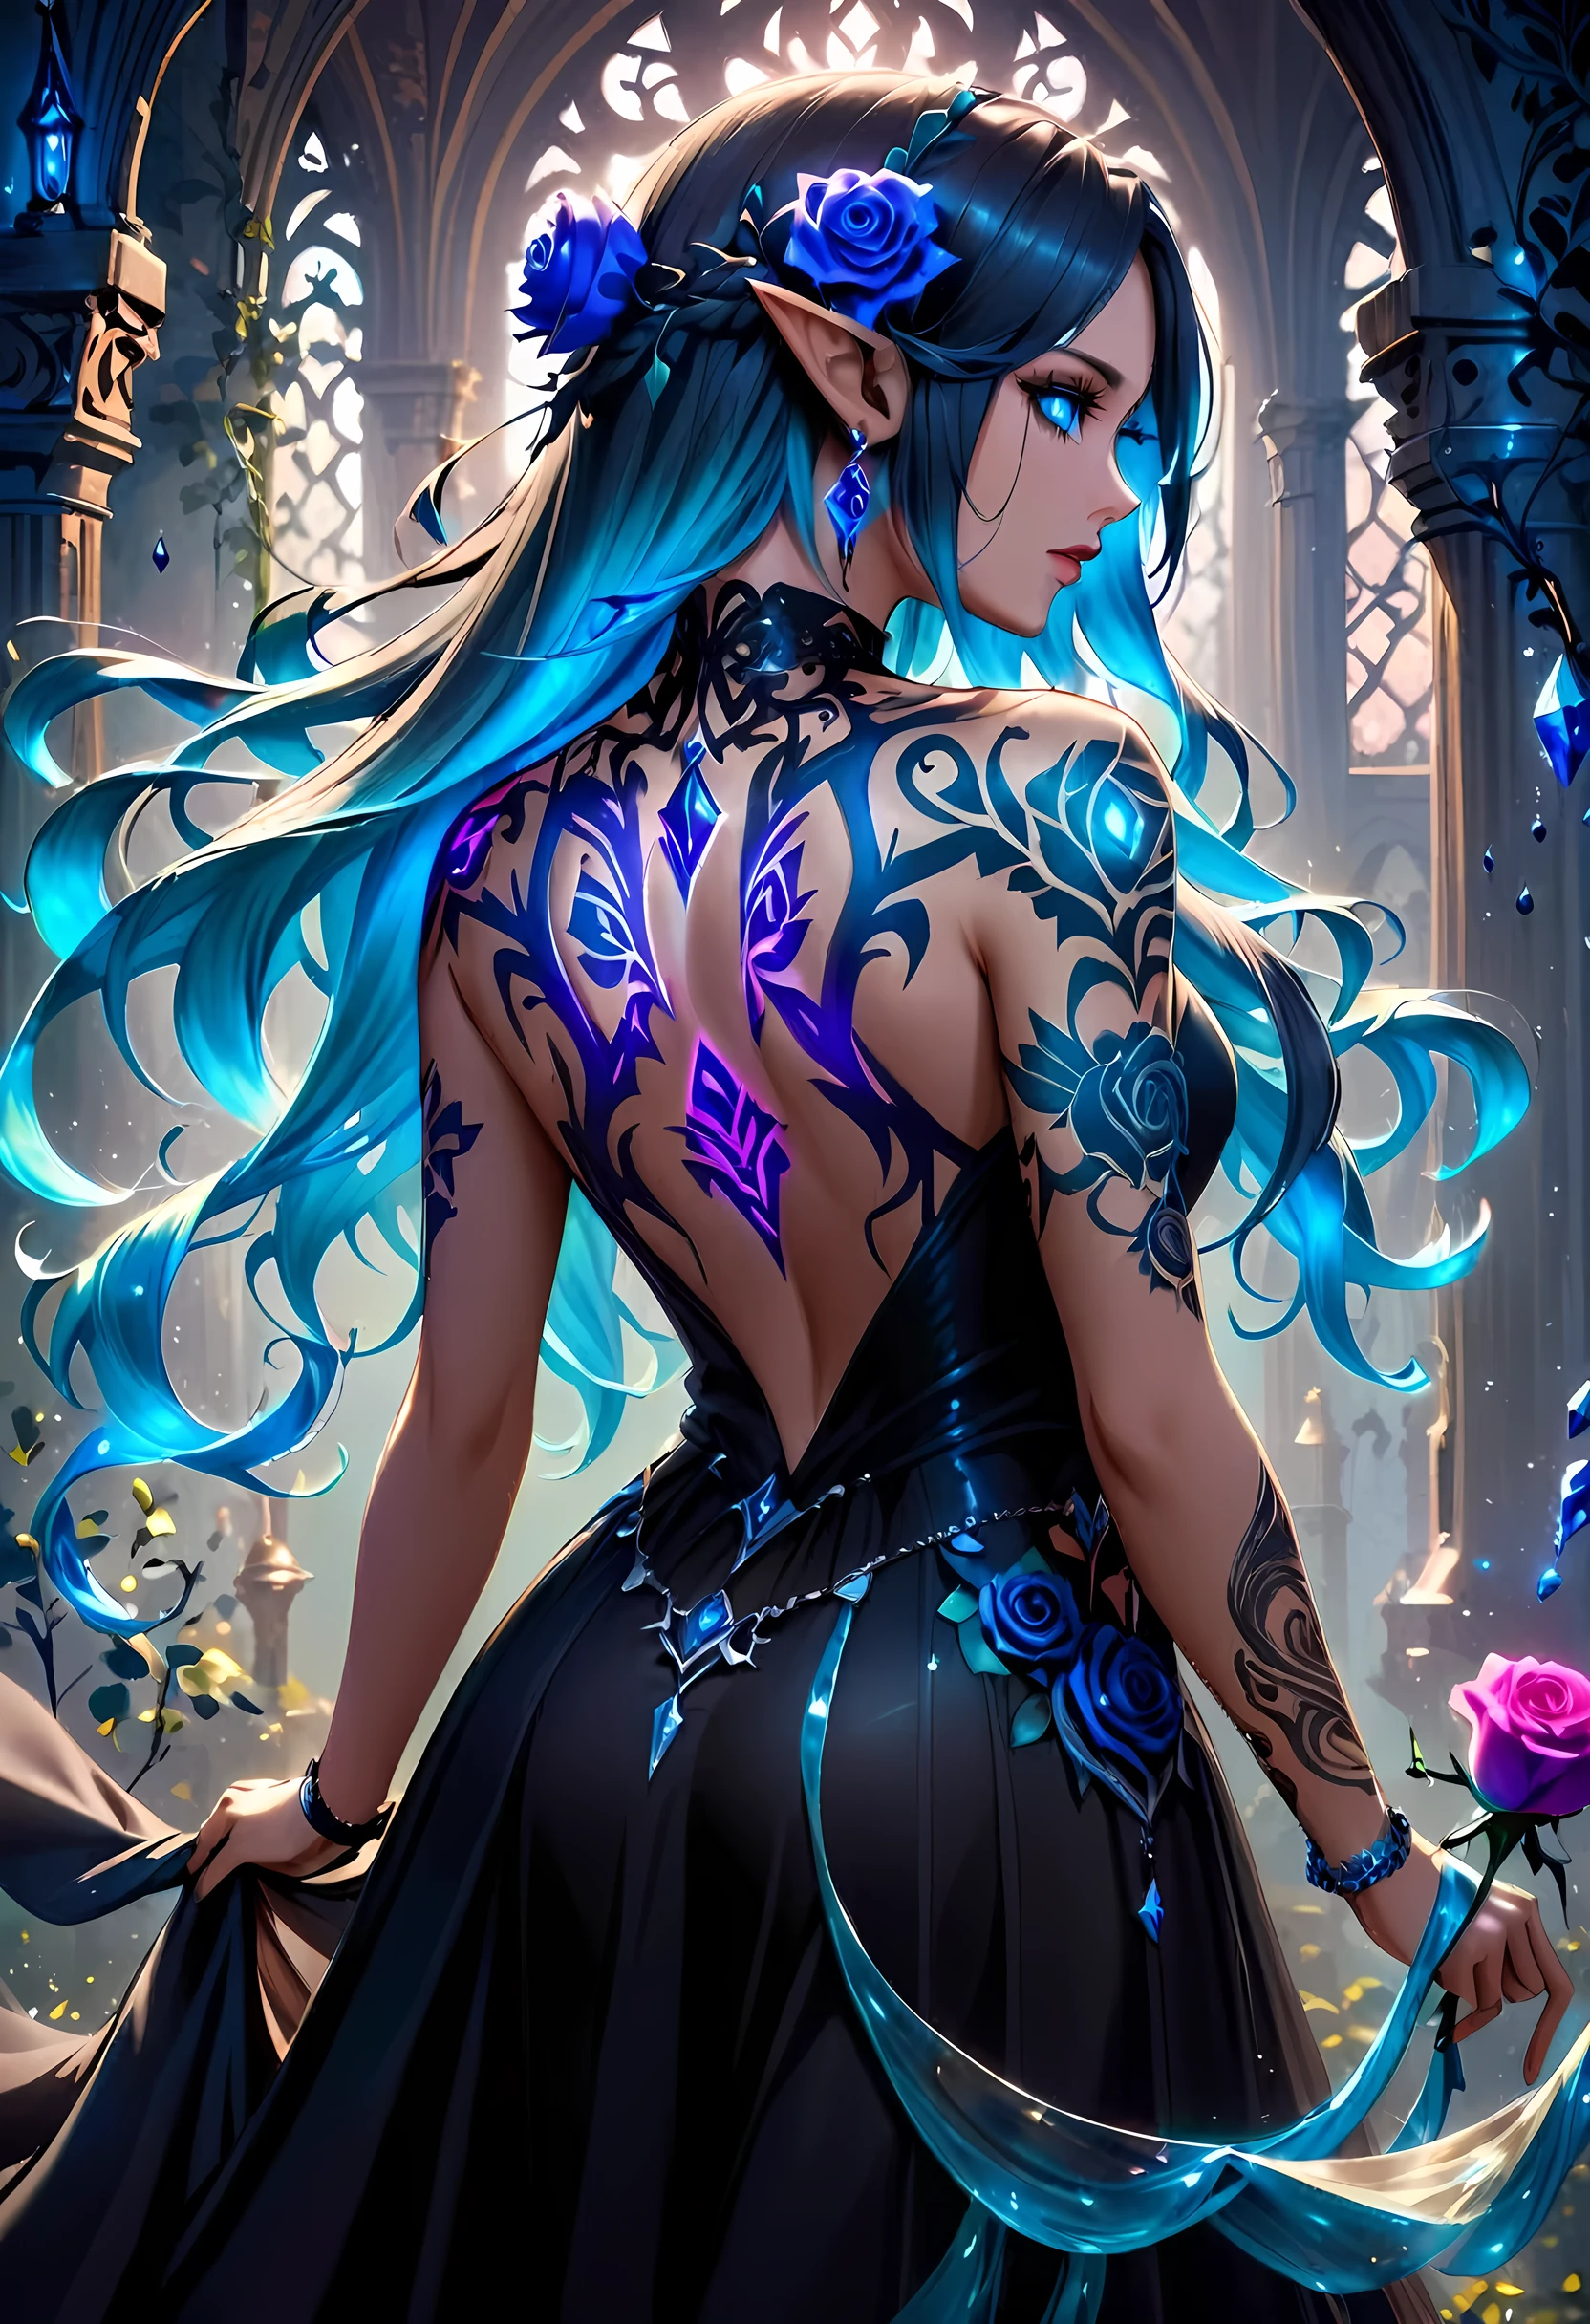 Arafed, Dark fantasy art, fantasy art, goth art, a picture of a tattoo on the back of a female elf,  of  glowing tattoo of a ((blue rose: 1.3)) the rose tattoo is vivid, intricate detailed coming to life rose from the ink to real life, AlchemyPunkAI, shoot taken from the back, ((the back is visible: 1.3), she wears a transparent  black dress, the dress is elegant, flowing, elven style, that the tattoos glow, dynamic hair color, dynamic hair style, crystalline dress